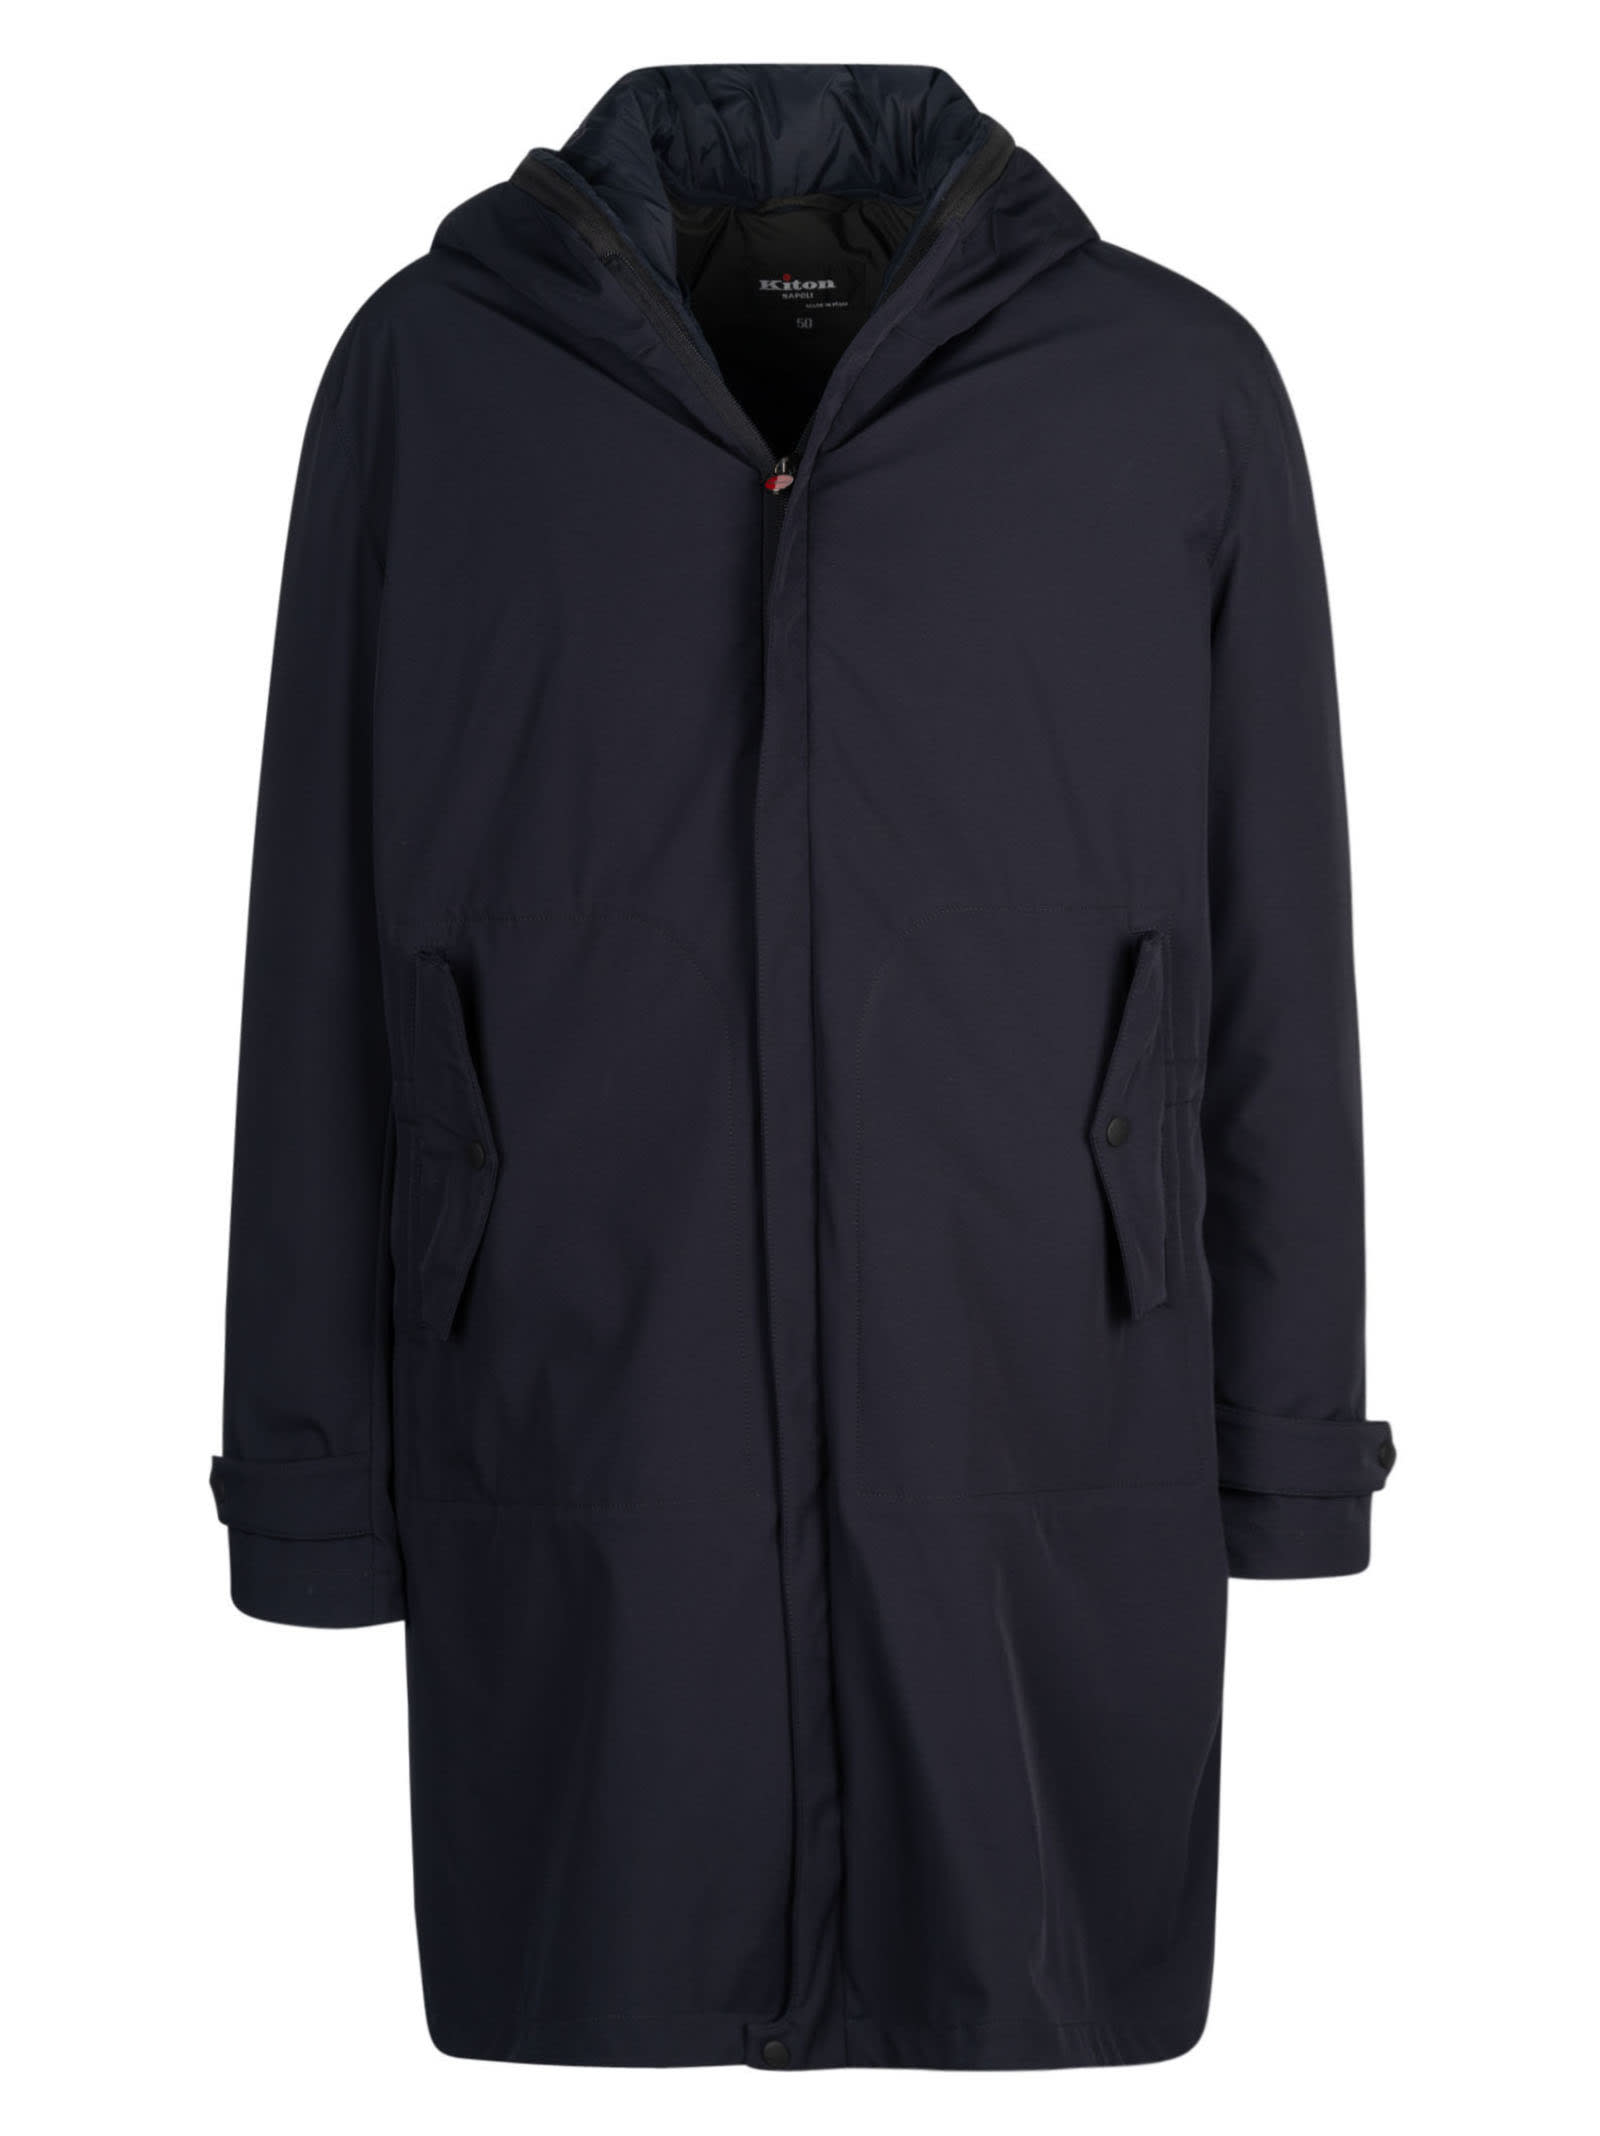 Kiton Concealed Hooded Parka